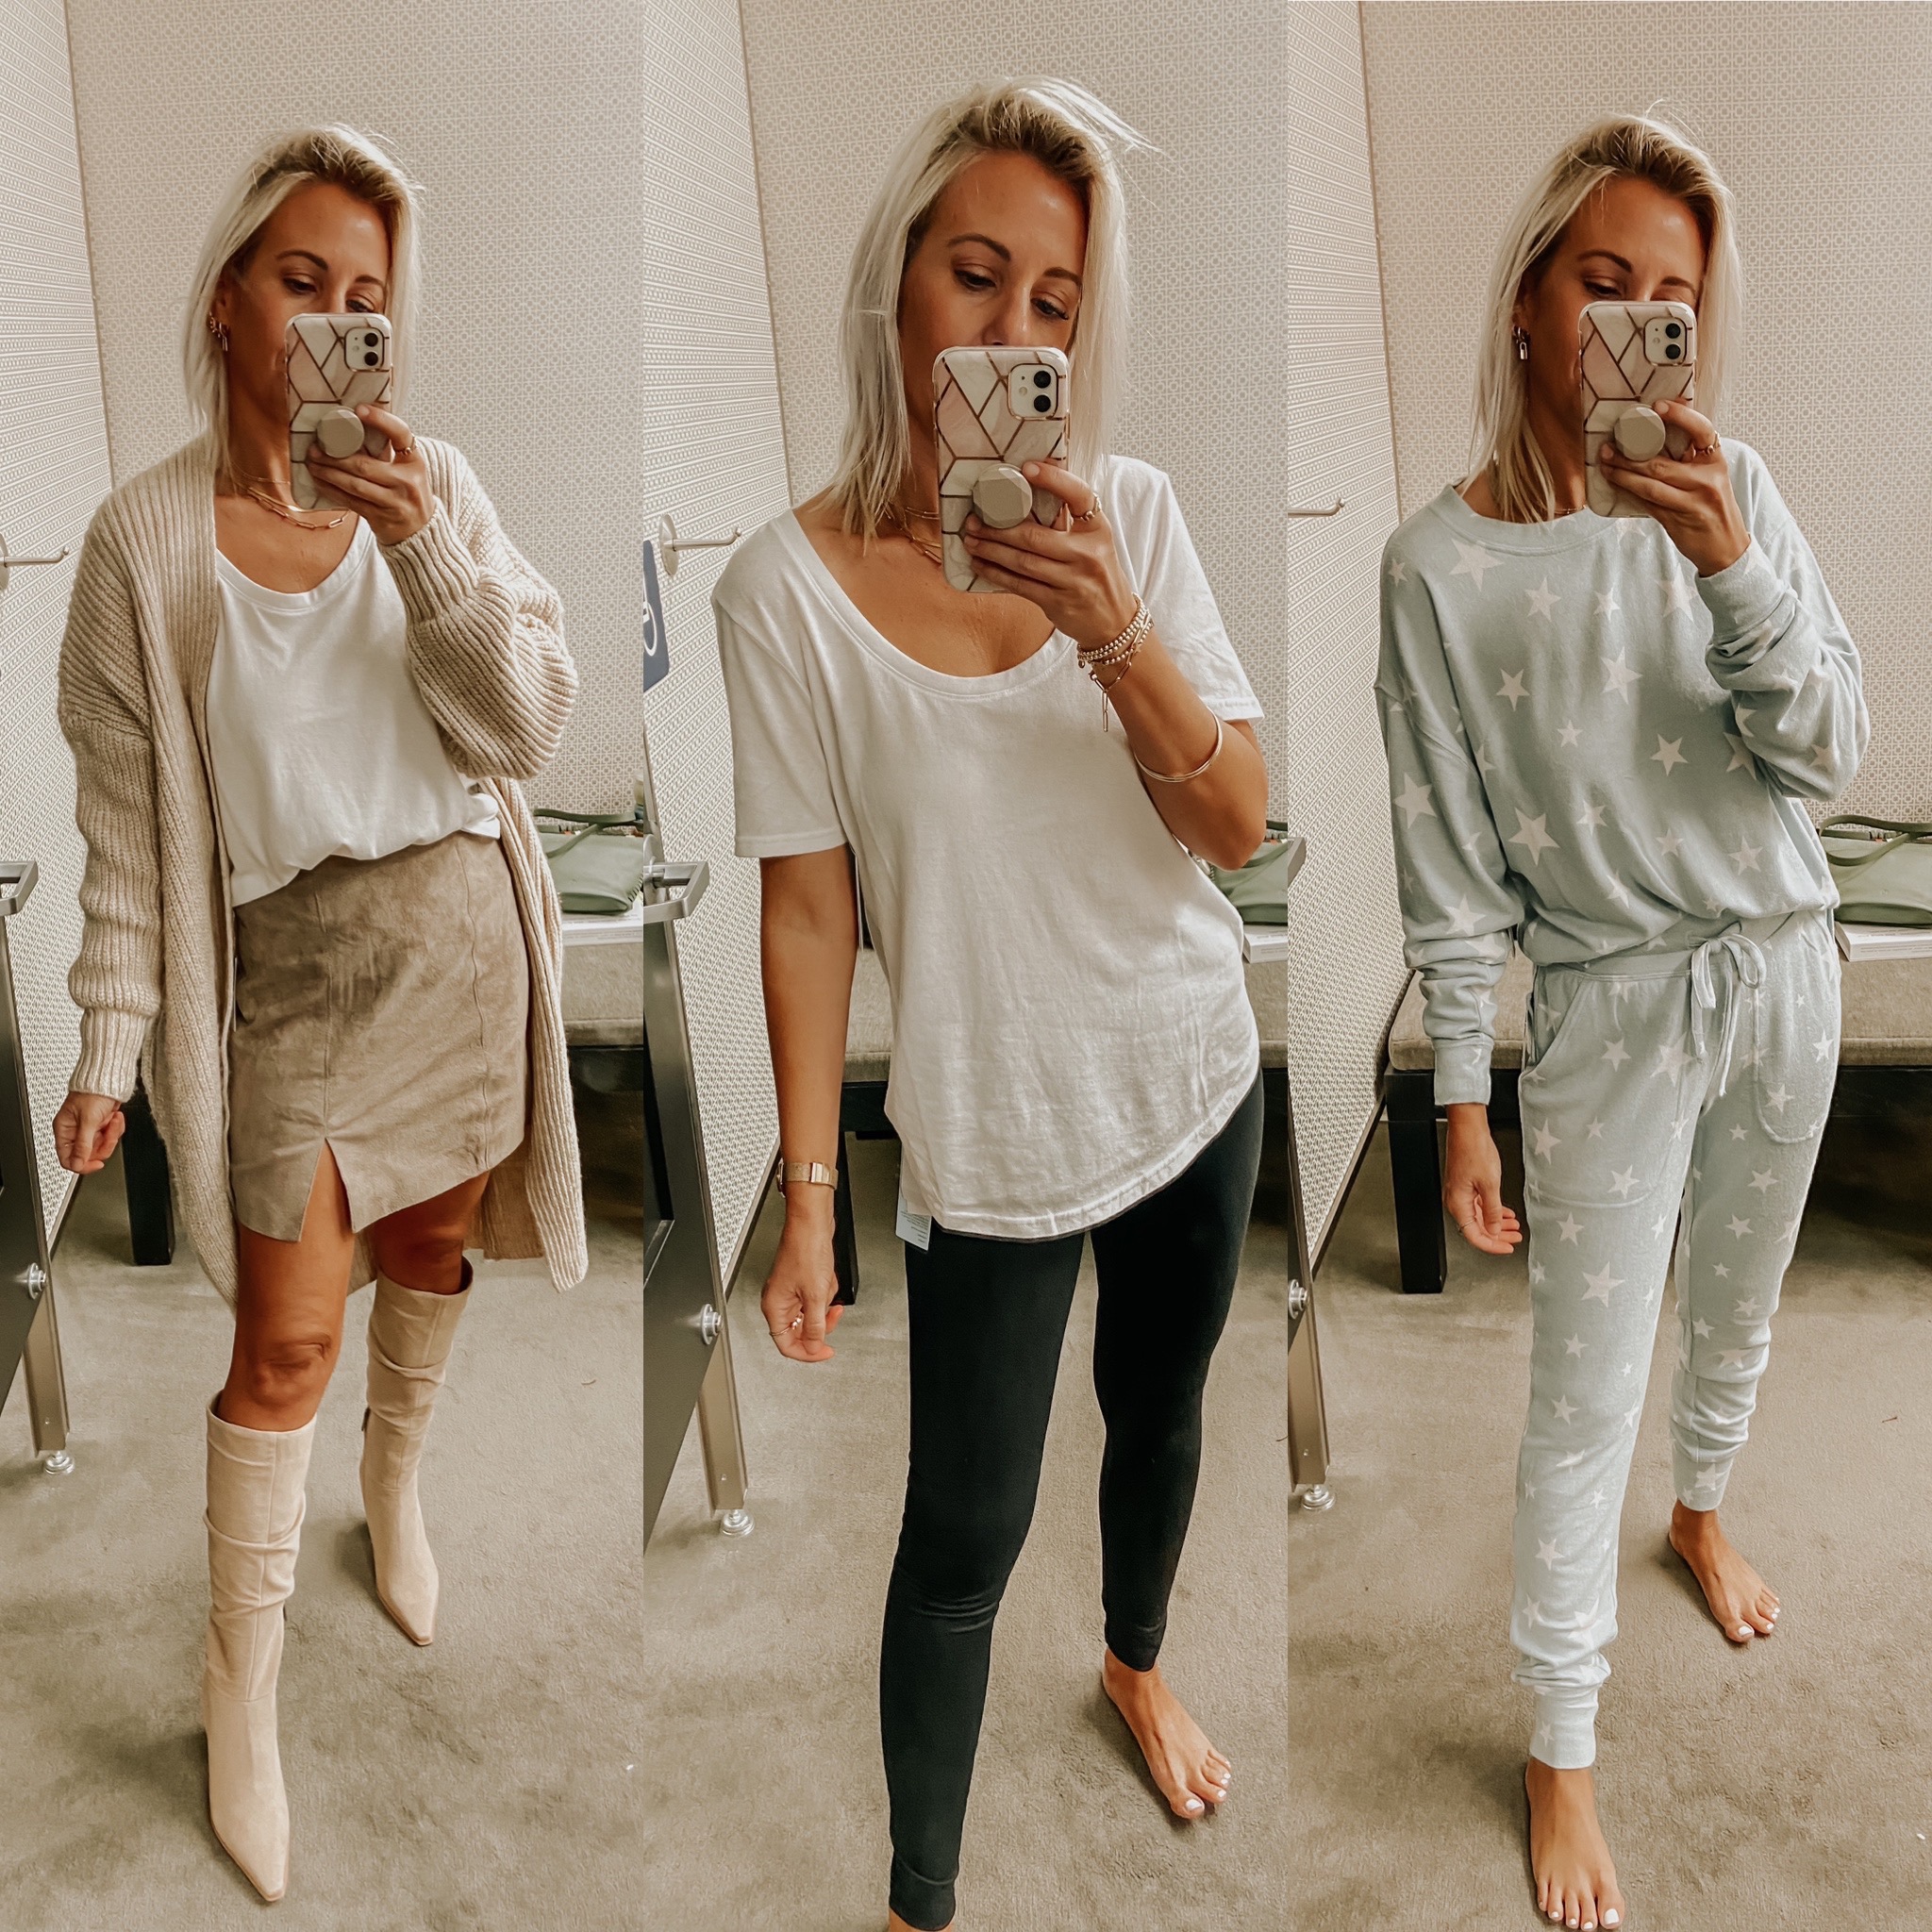 NORDSTROM SALE 1ST TRY-ON-Jaclyn De Leon Style + sharing my first in store try-on of the nordstrom sale + what I plan on ordering online